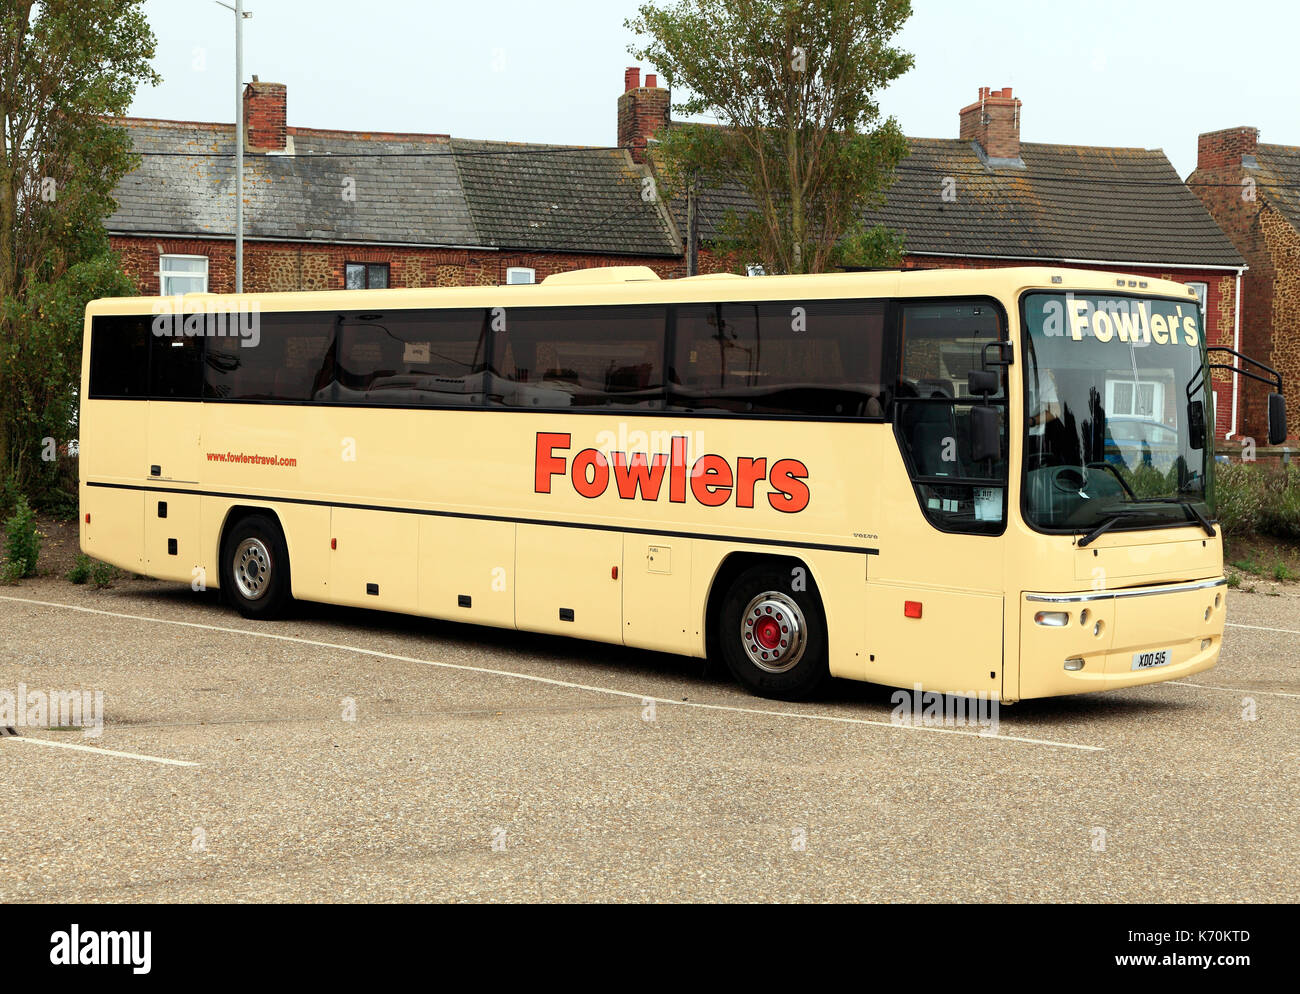 Fowlers Coaches, coach, day trips, trip, excursions, excursion,  travel company, companies, holiday, holidays, England, UK Stock Photo